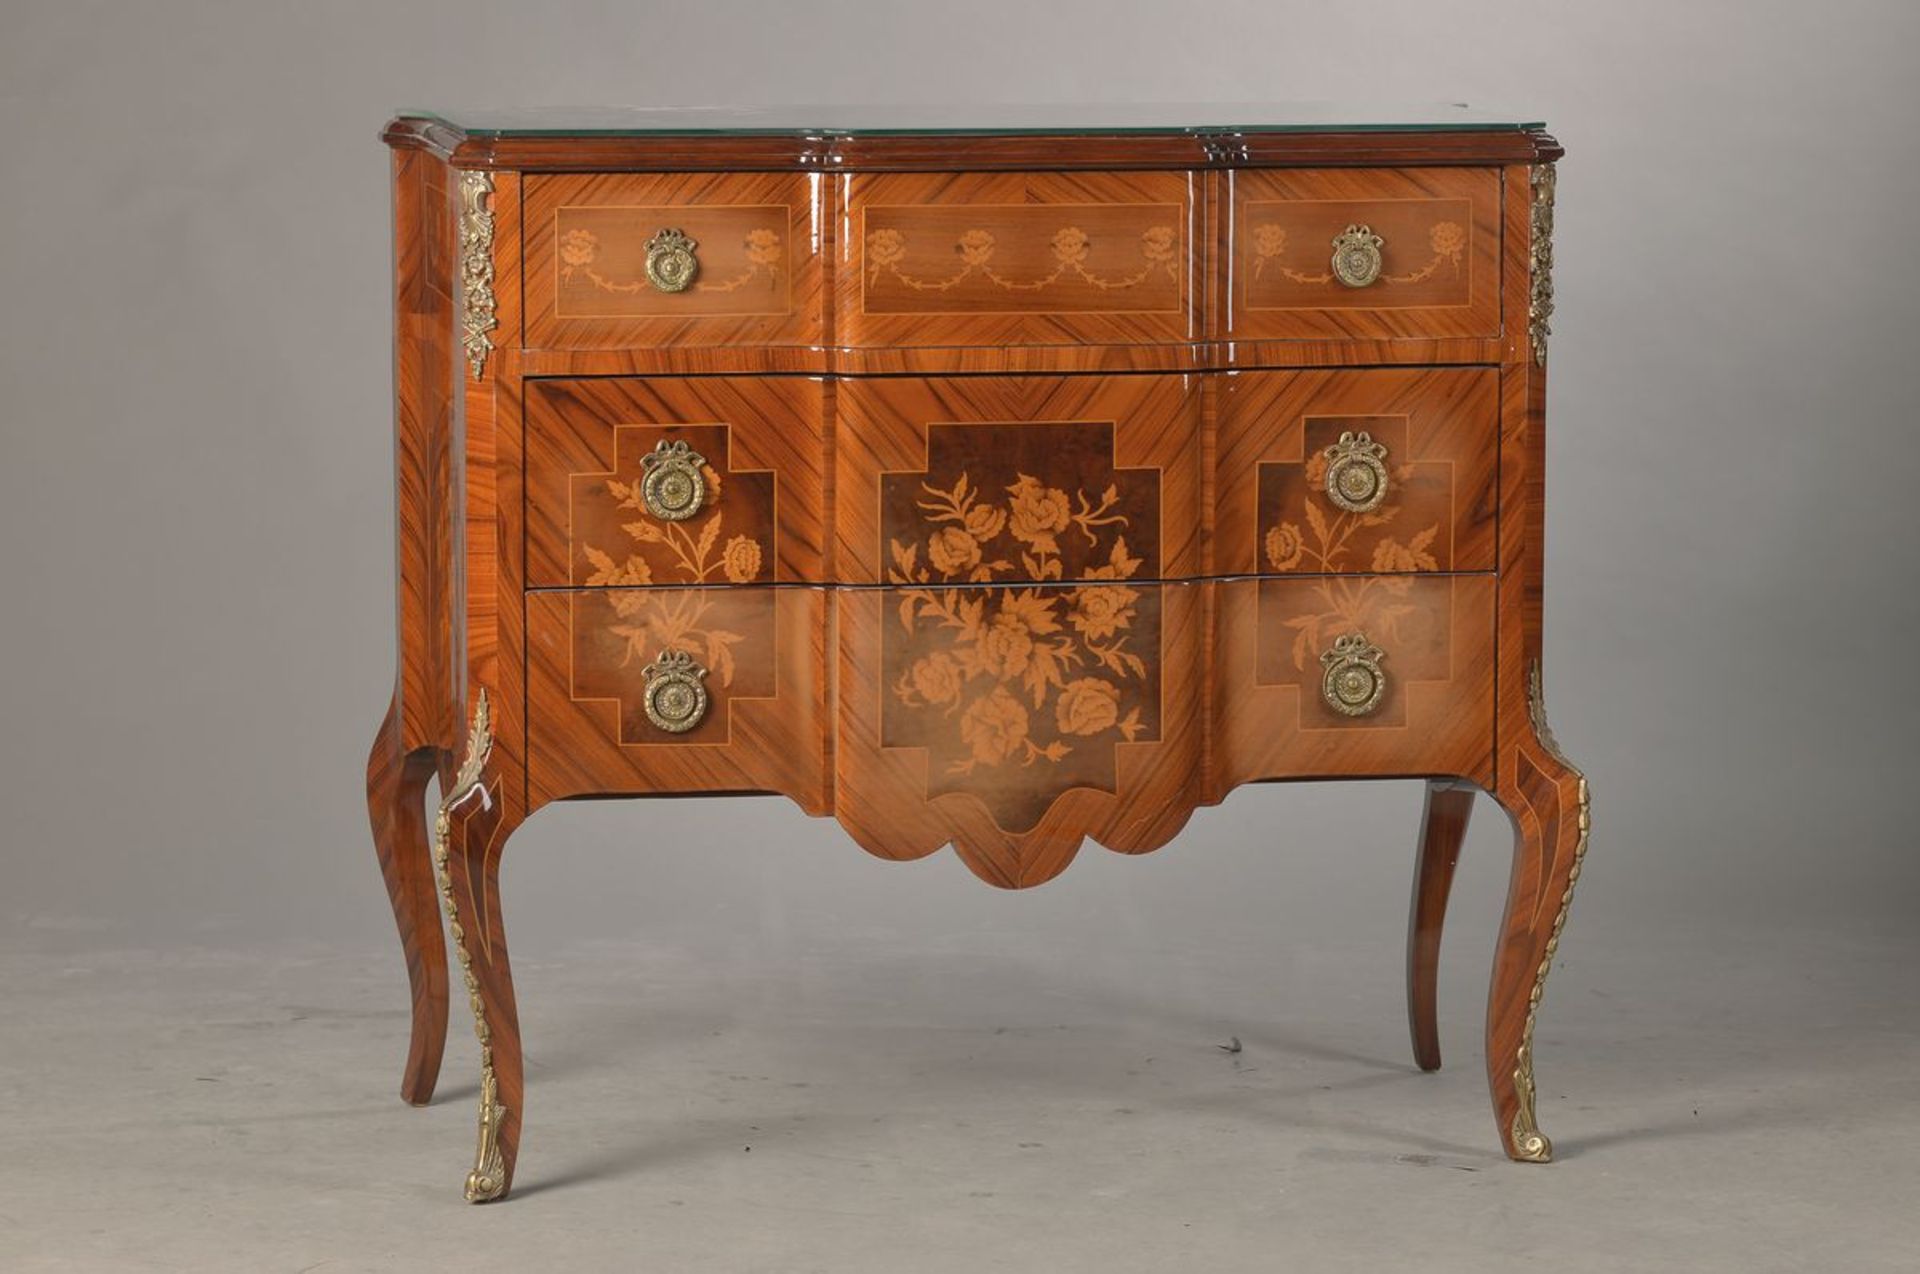 chest of drawers, Louis Seize-style, 20th c., palisander veneer and mahogany veneer, floral floral